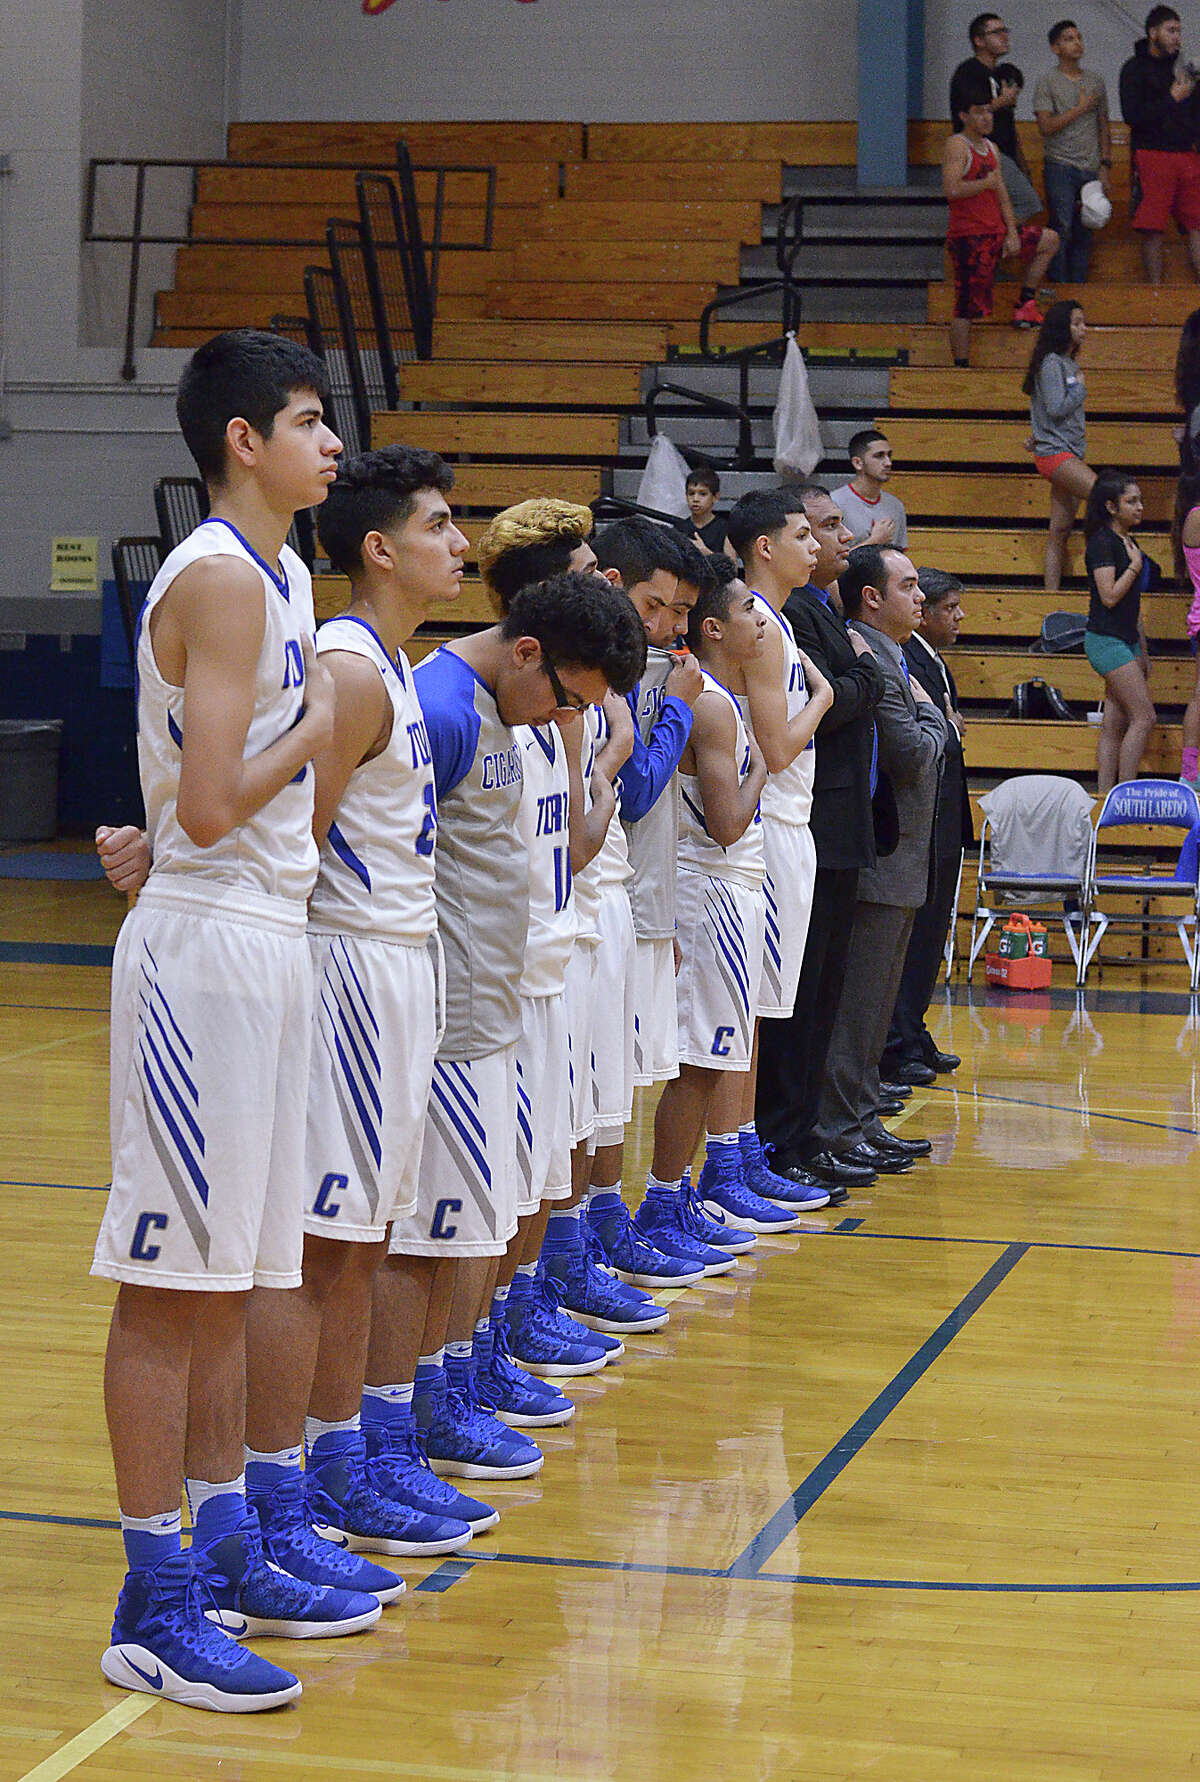 The Cigarroa Toros boys basketball team and Sharyland played a district game at Cigarroa on Tuesday, January 24, 2017.